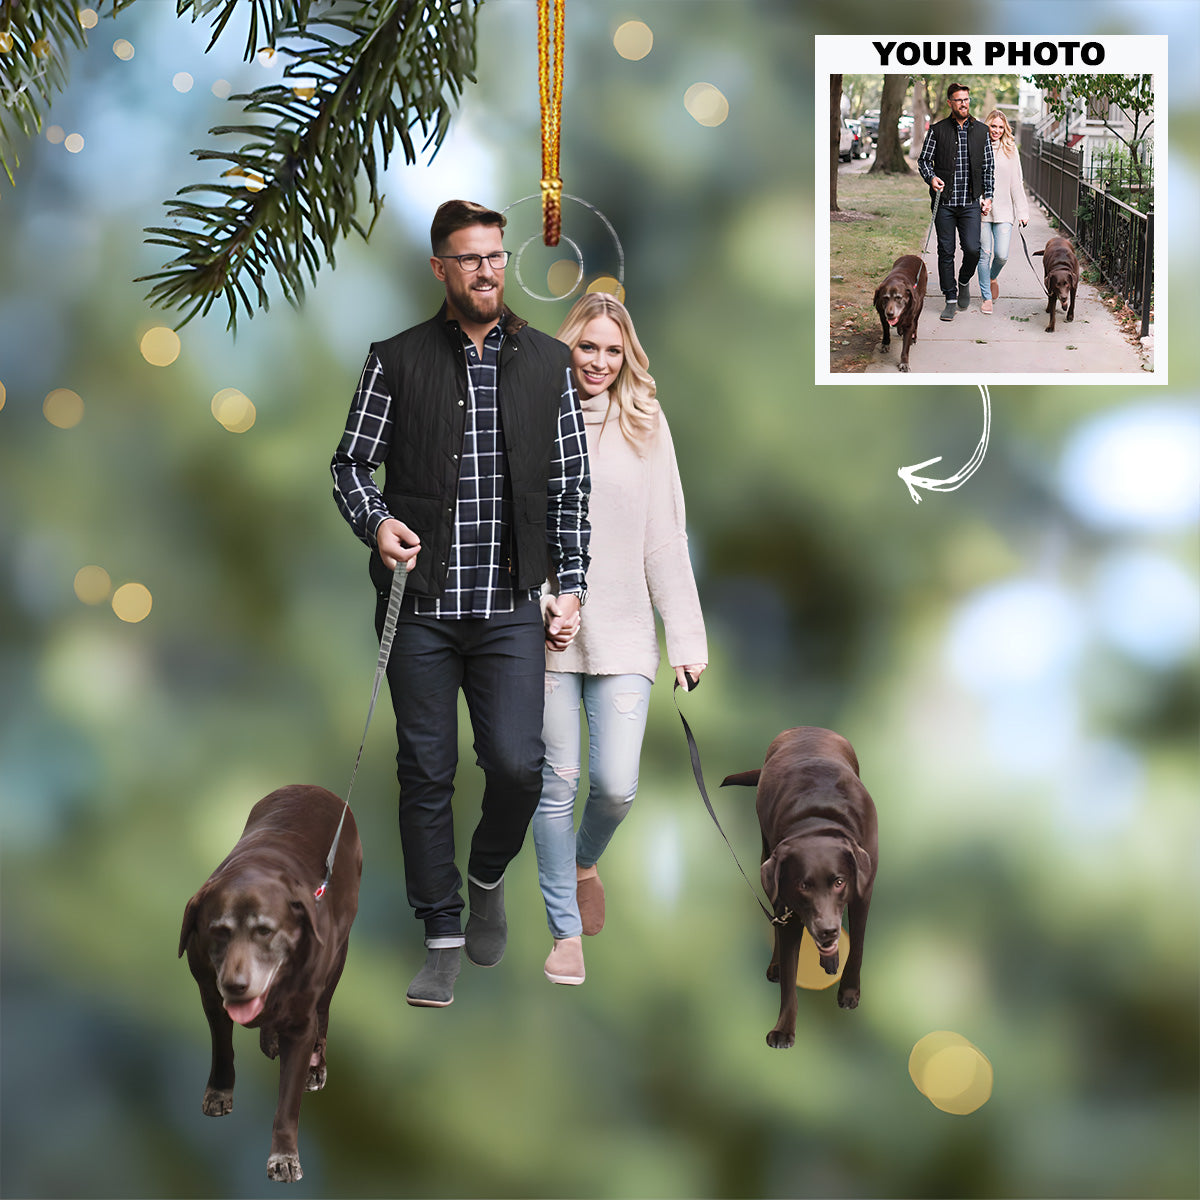 Walking The Dog - Personalized Photo Mica Ornament - Customized Your Photo Ornament - Christmas Gift For Dog Owners, Dog Lovers